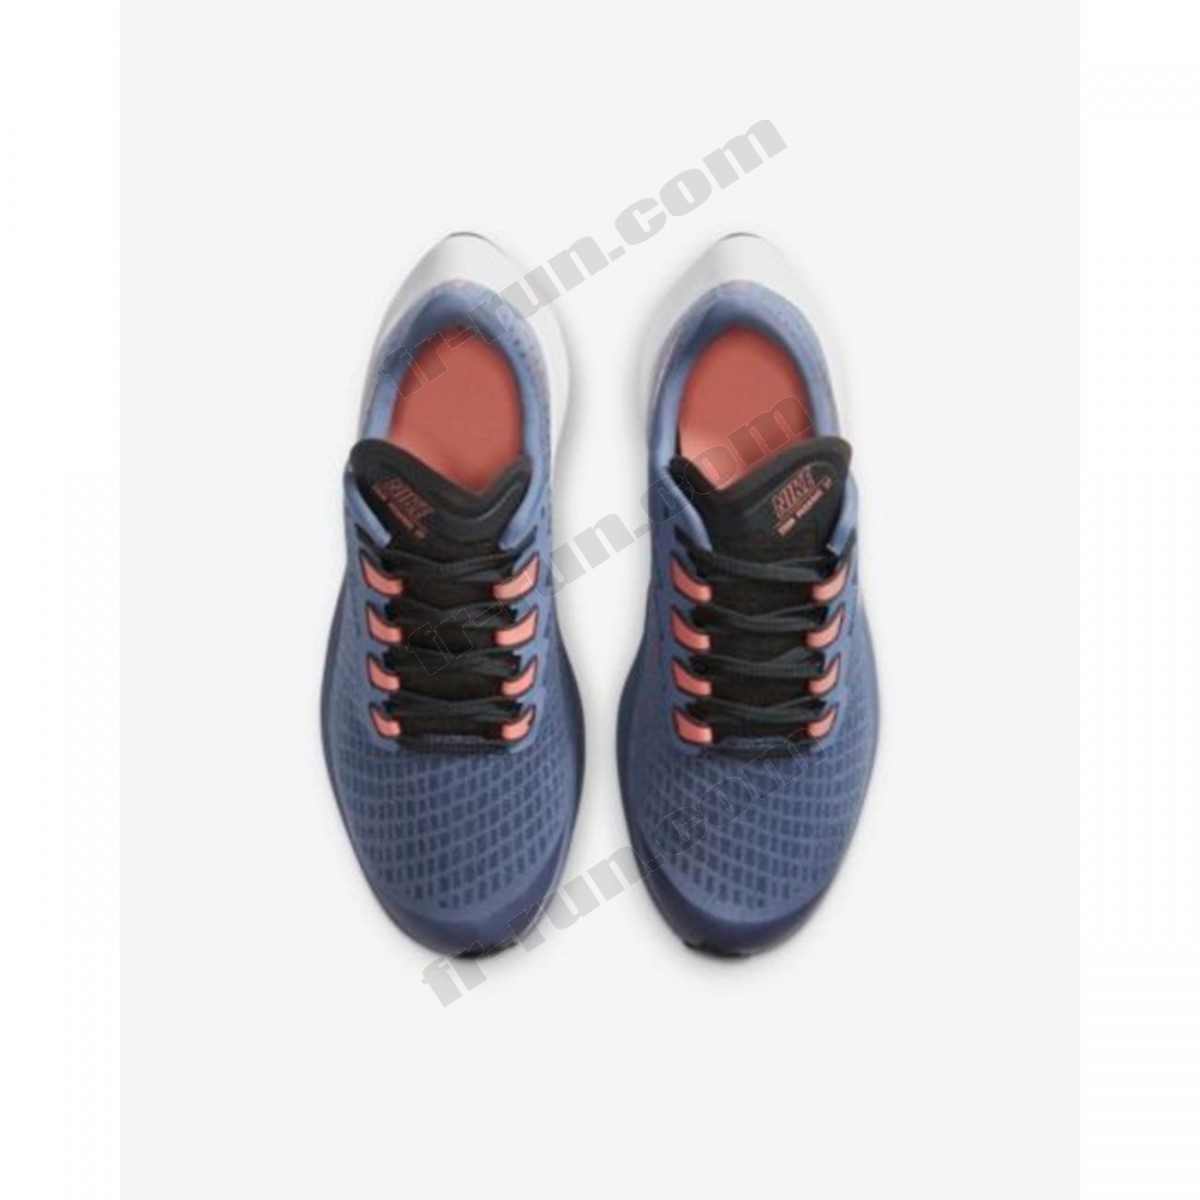 Nike/CHAUSSURES running NIKE AIR ZOOM PEGASUS 37 √ Nouveau style √ Soldes - -2